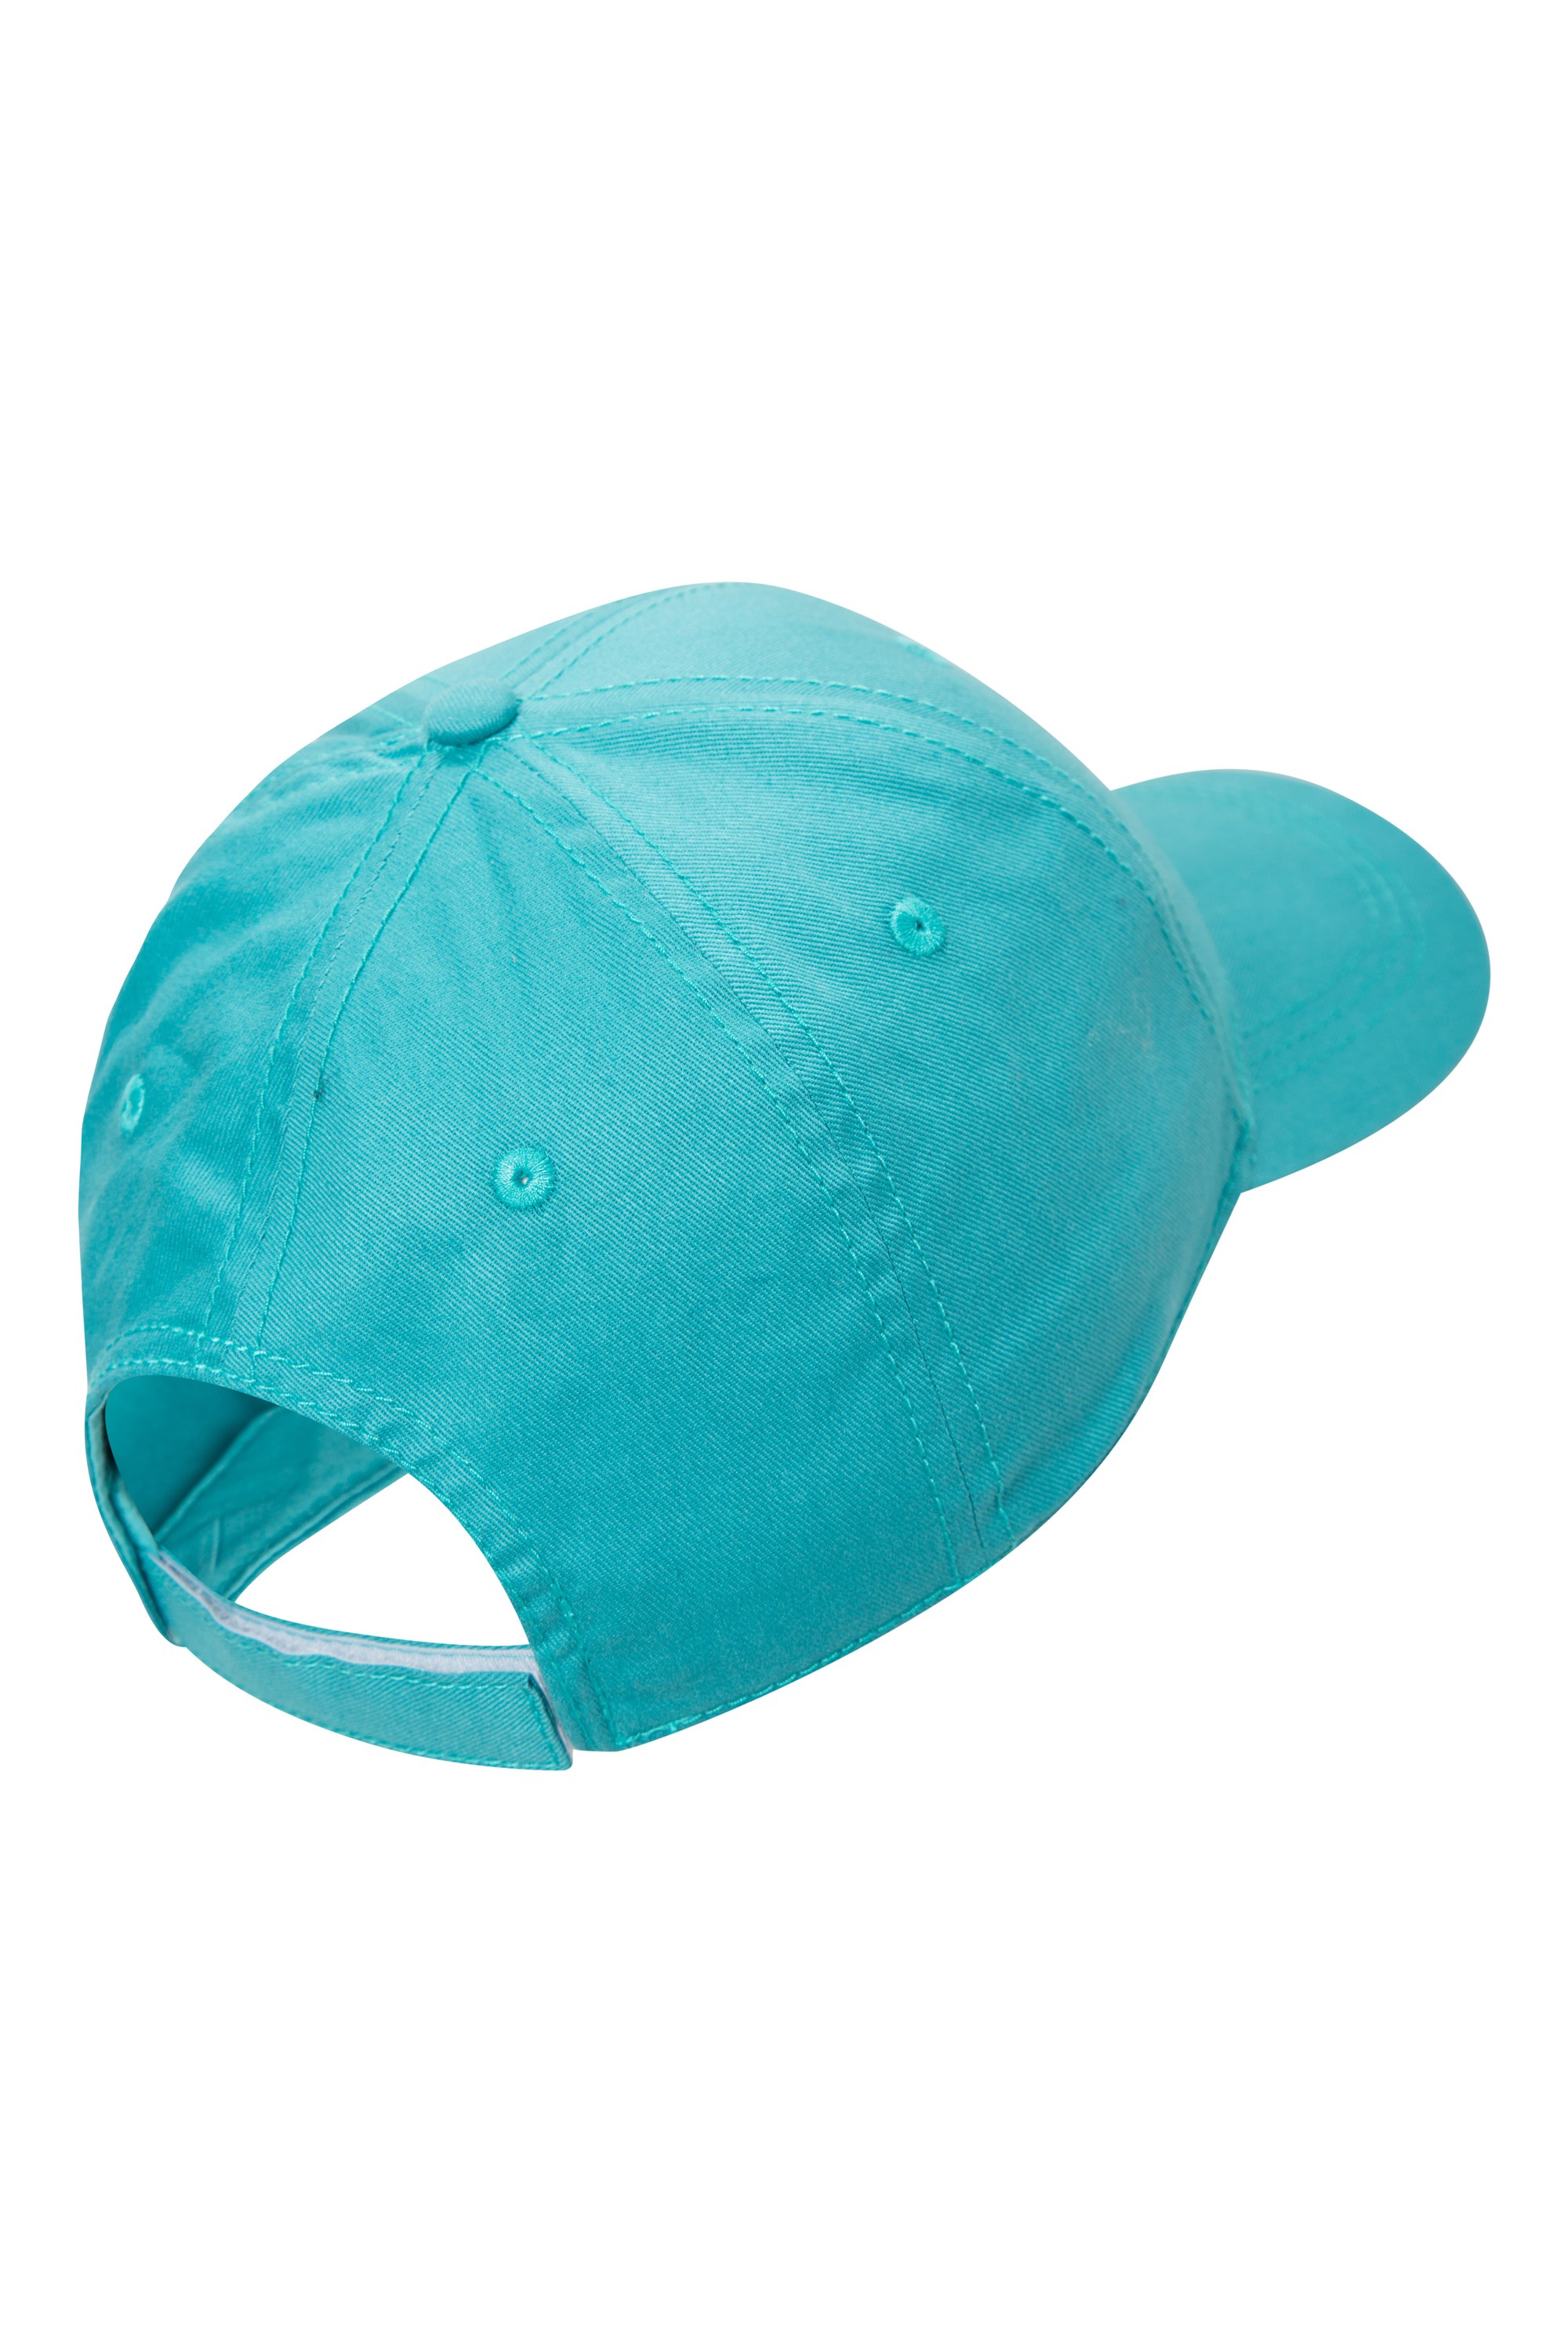 Mountain Warehouse Glare Boys Baseball Cap Blue with Hoop and Loop Strap-One 